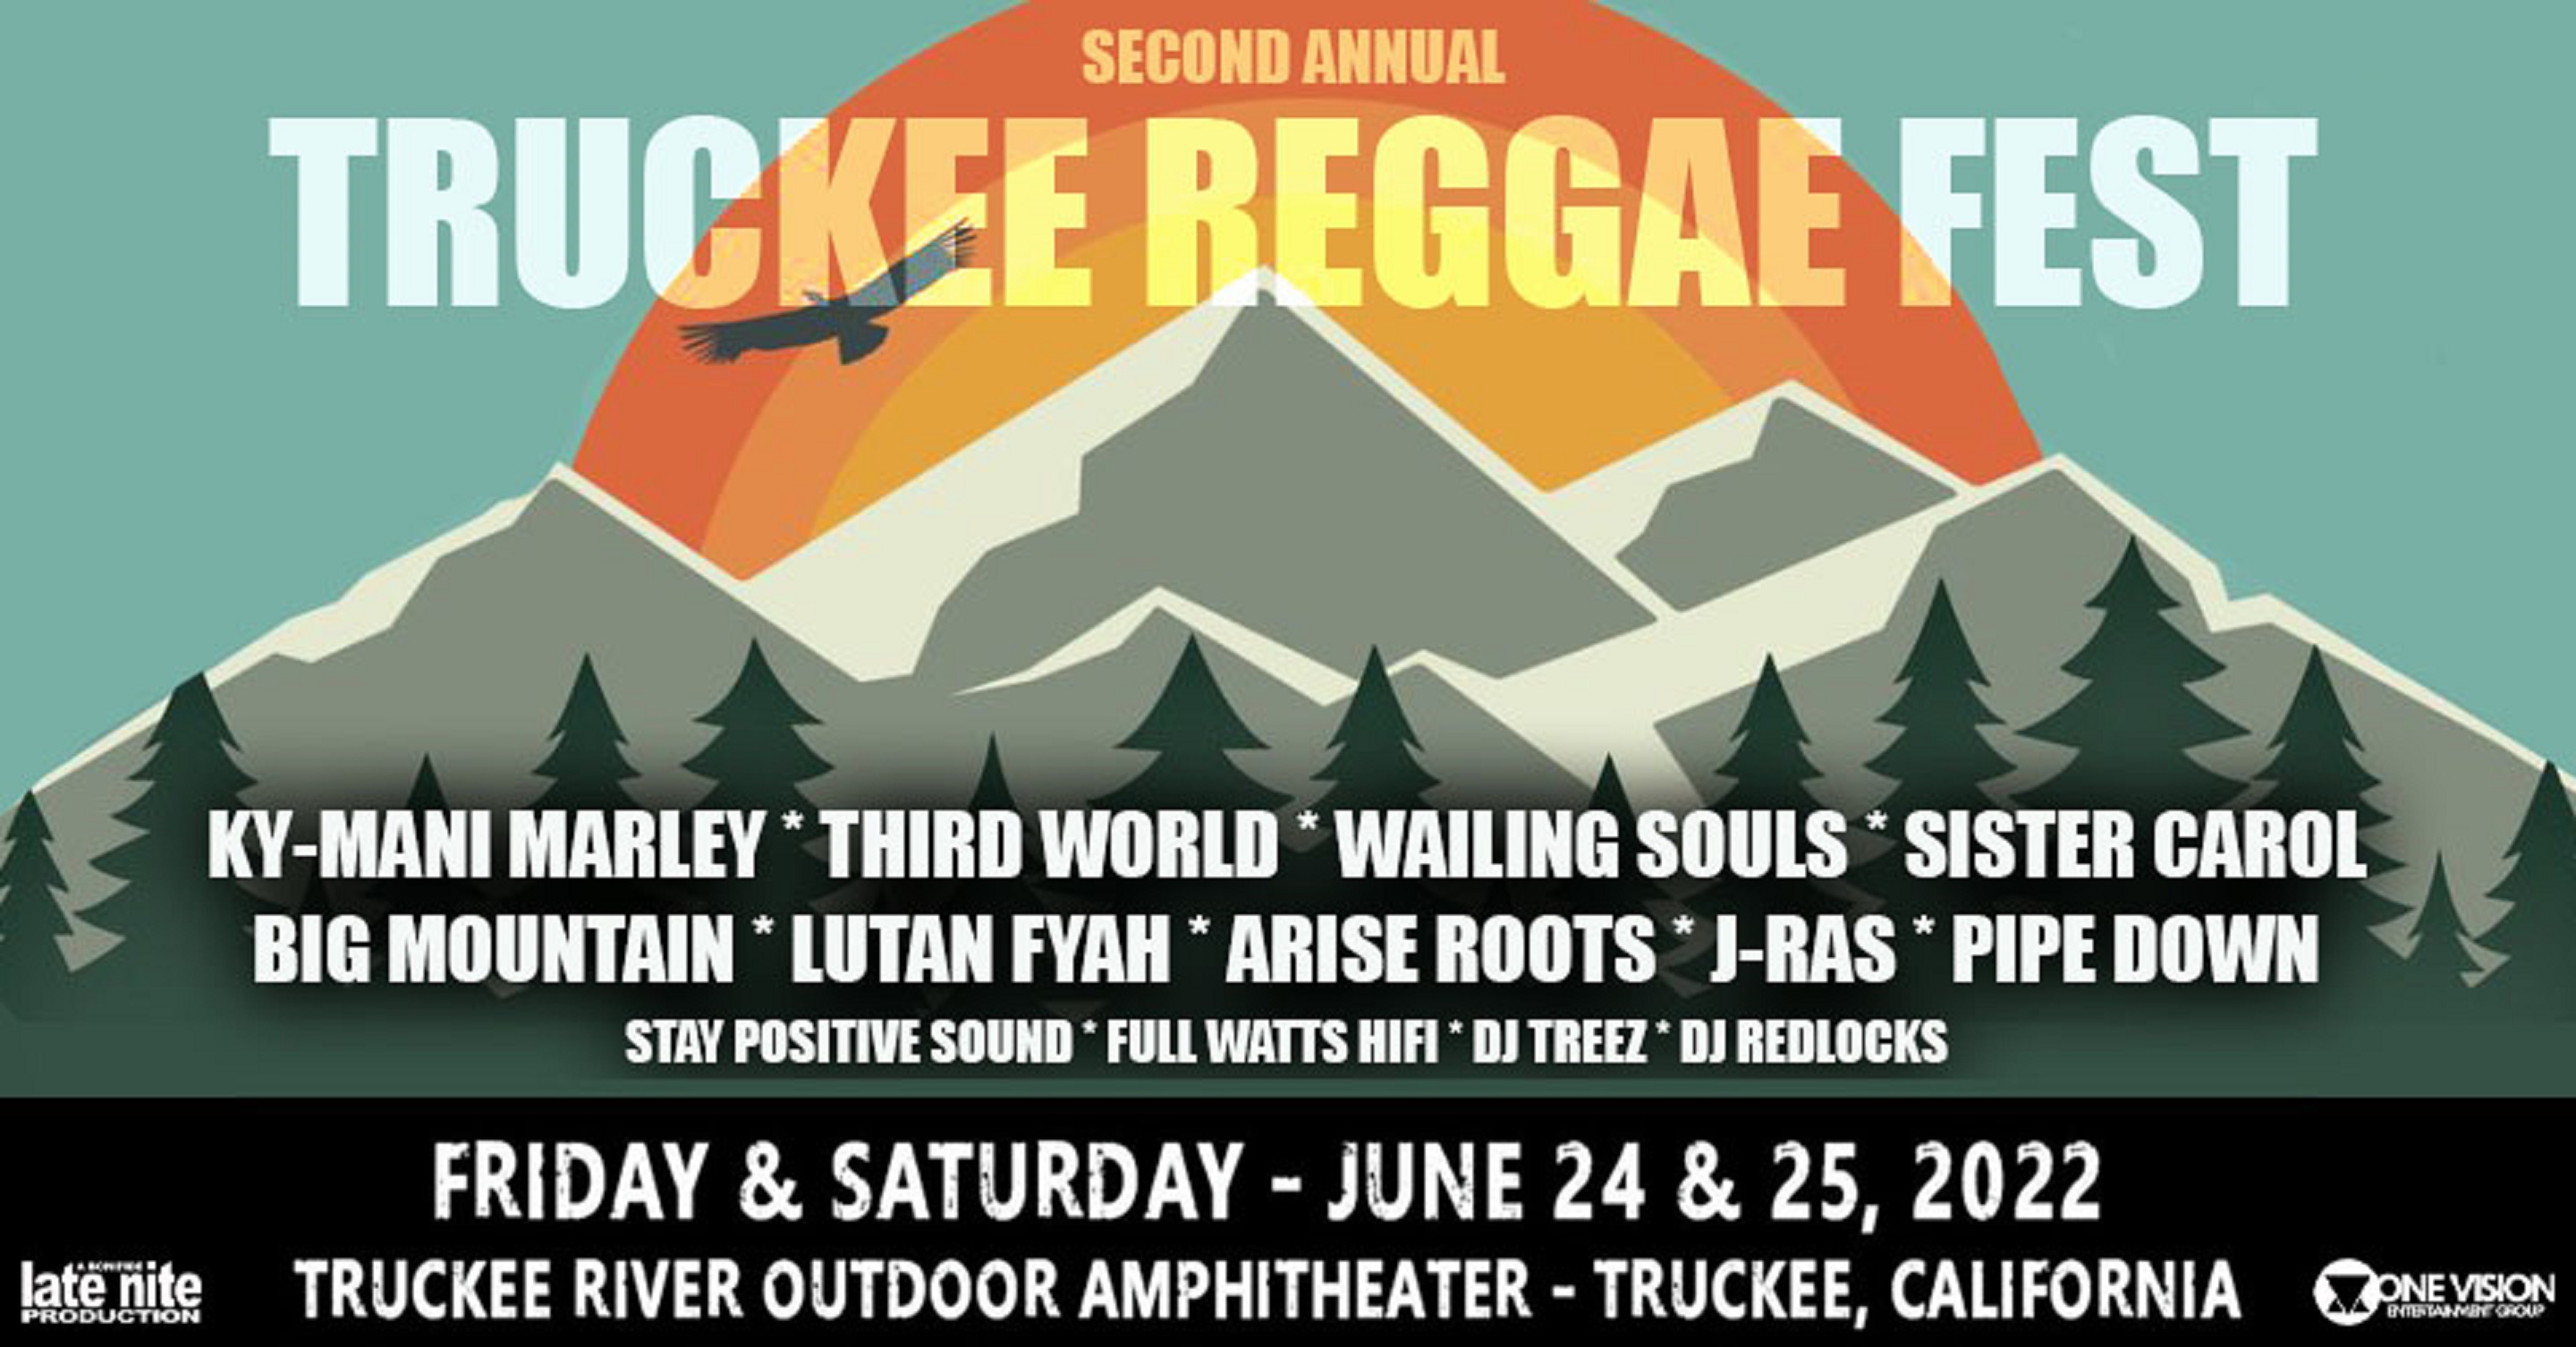 TRUCKEE REGGAE FEST announces "true to the roots" line-up - June 24 & 25, 2022